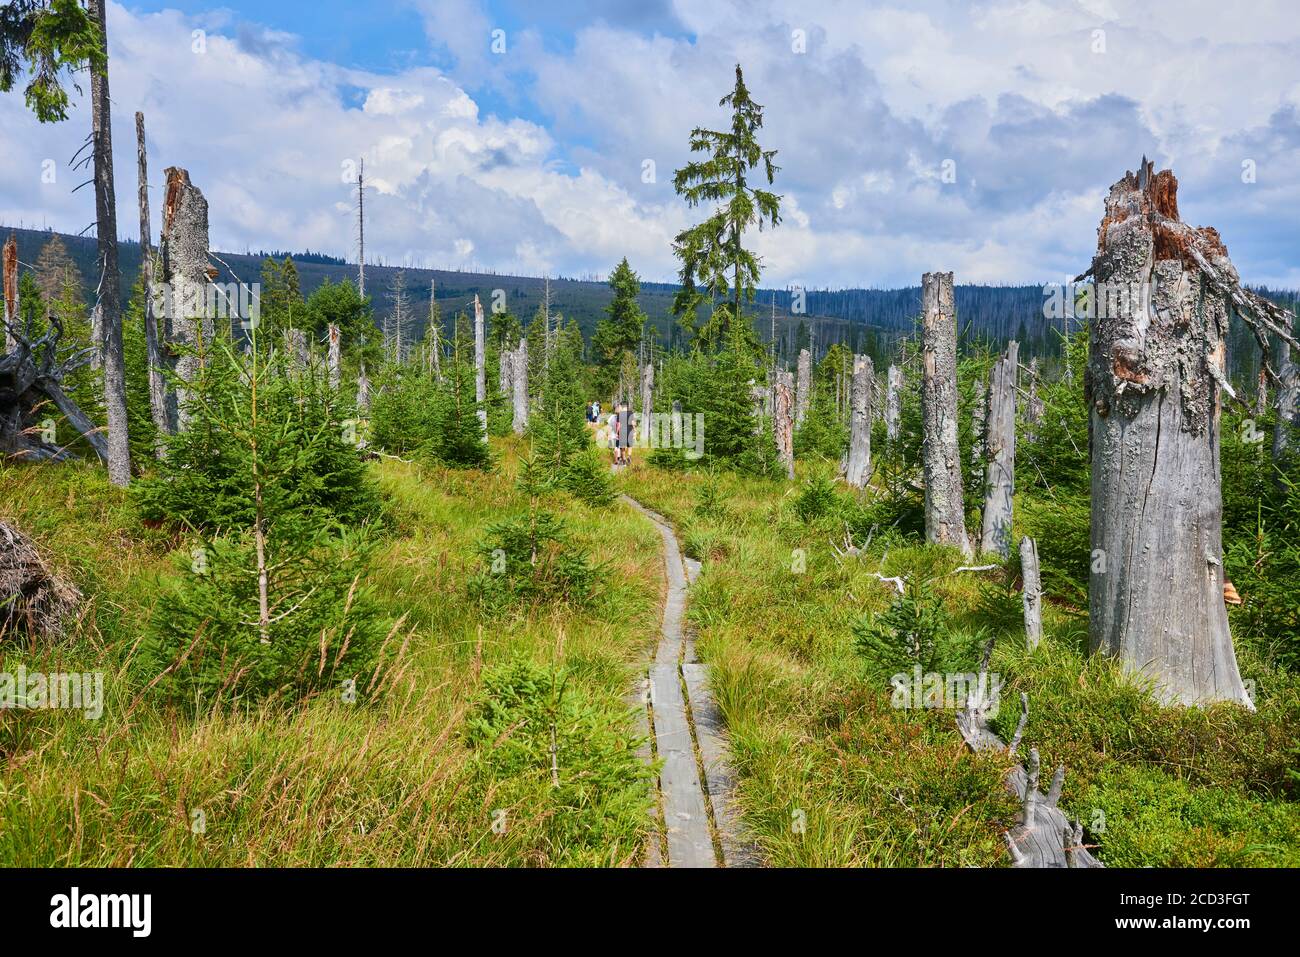 Bogs and small lakes in Latschenfilz area, Bavarian Forest National Park, Germany. Dead forest and natural forest regeneration without human intervent Stock Photo